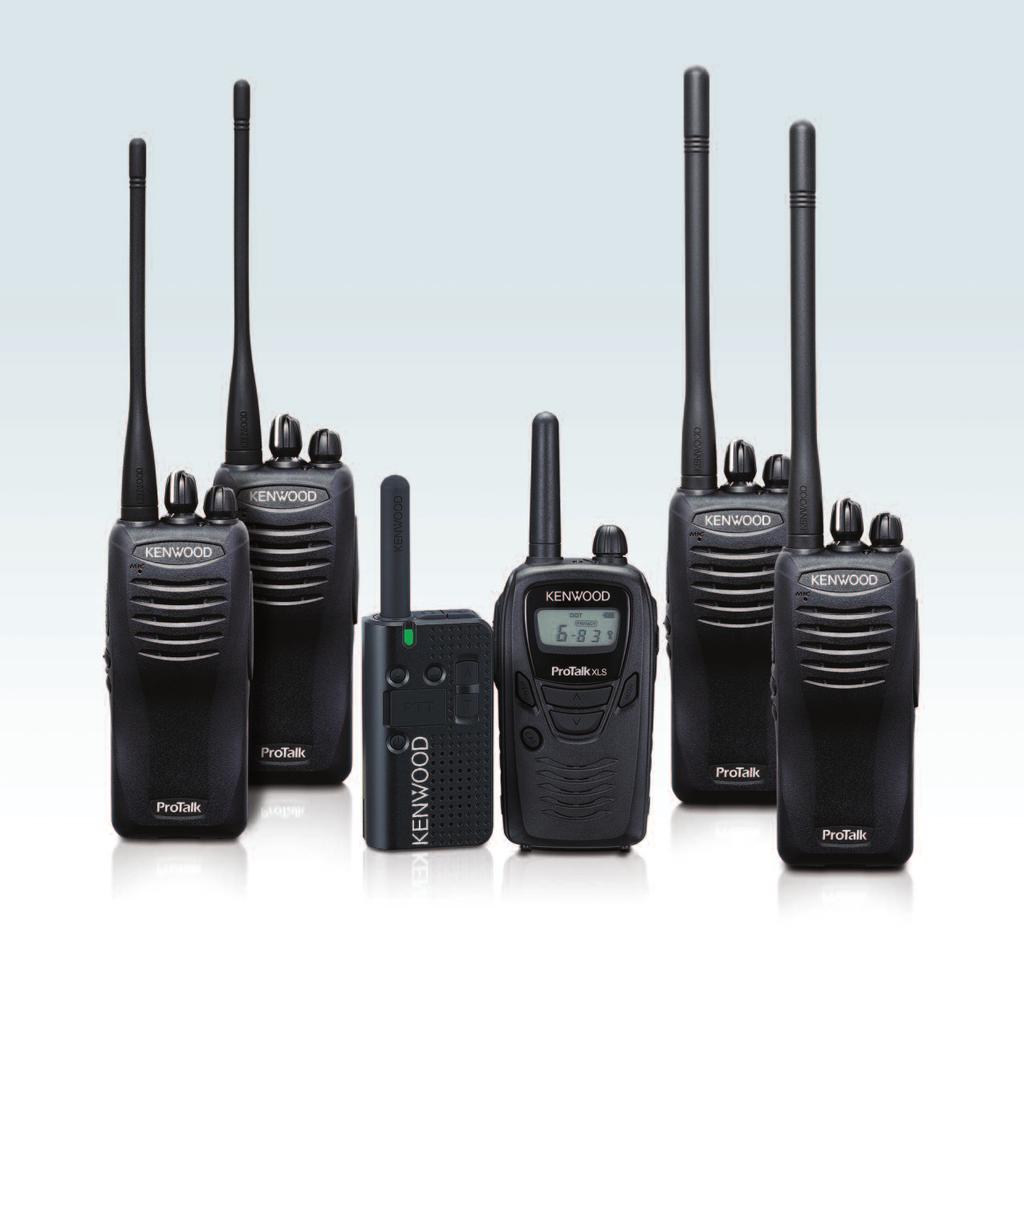 The right tool...the right choice......compact, durable business twoway radios from Kenwood.